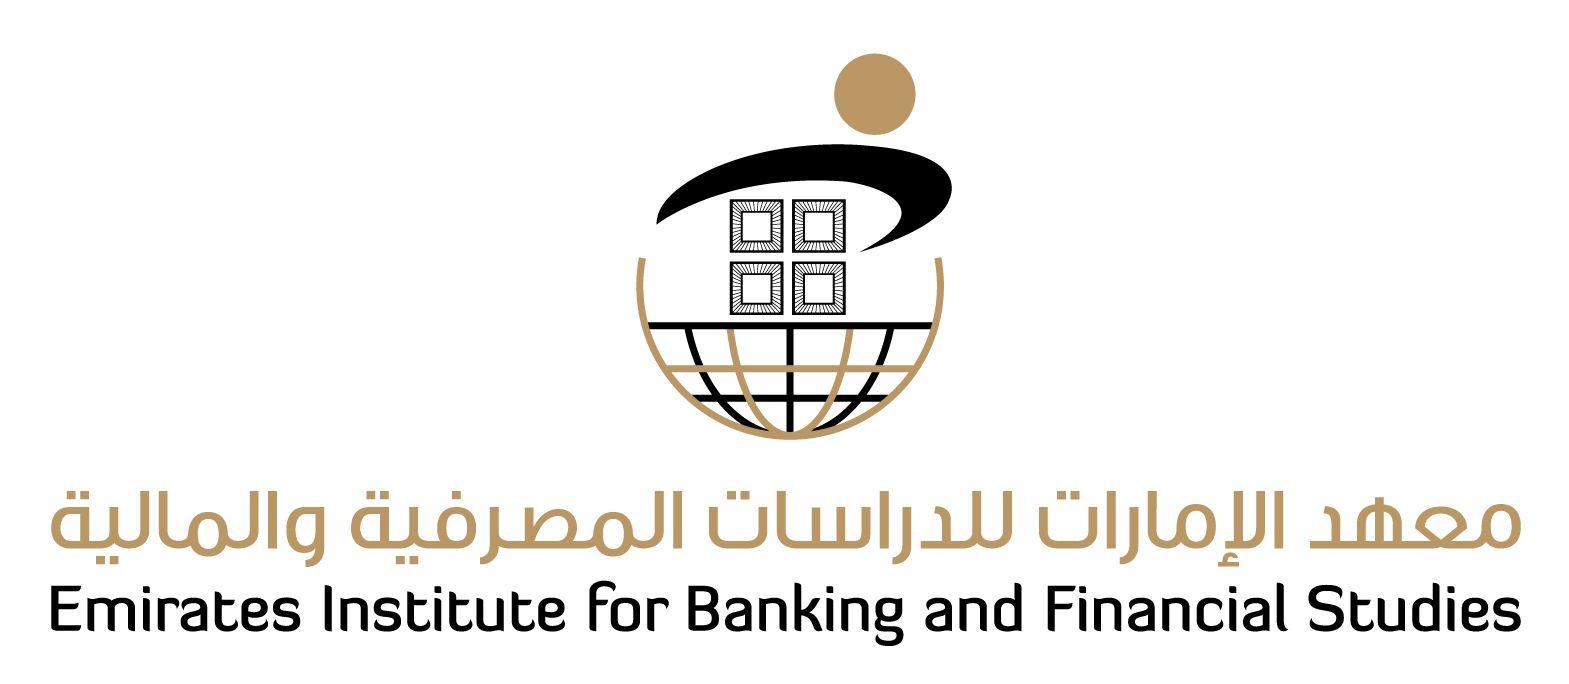 Banking and Financial Logo - Emirates Institute for Banking and Financial Studies